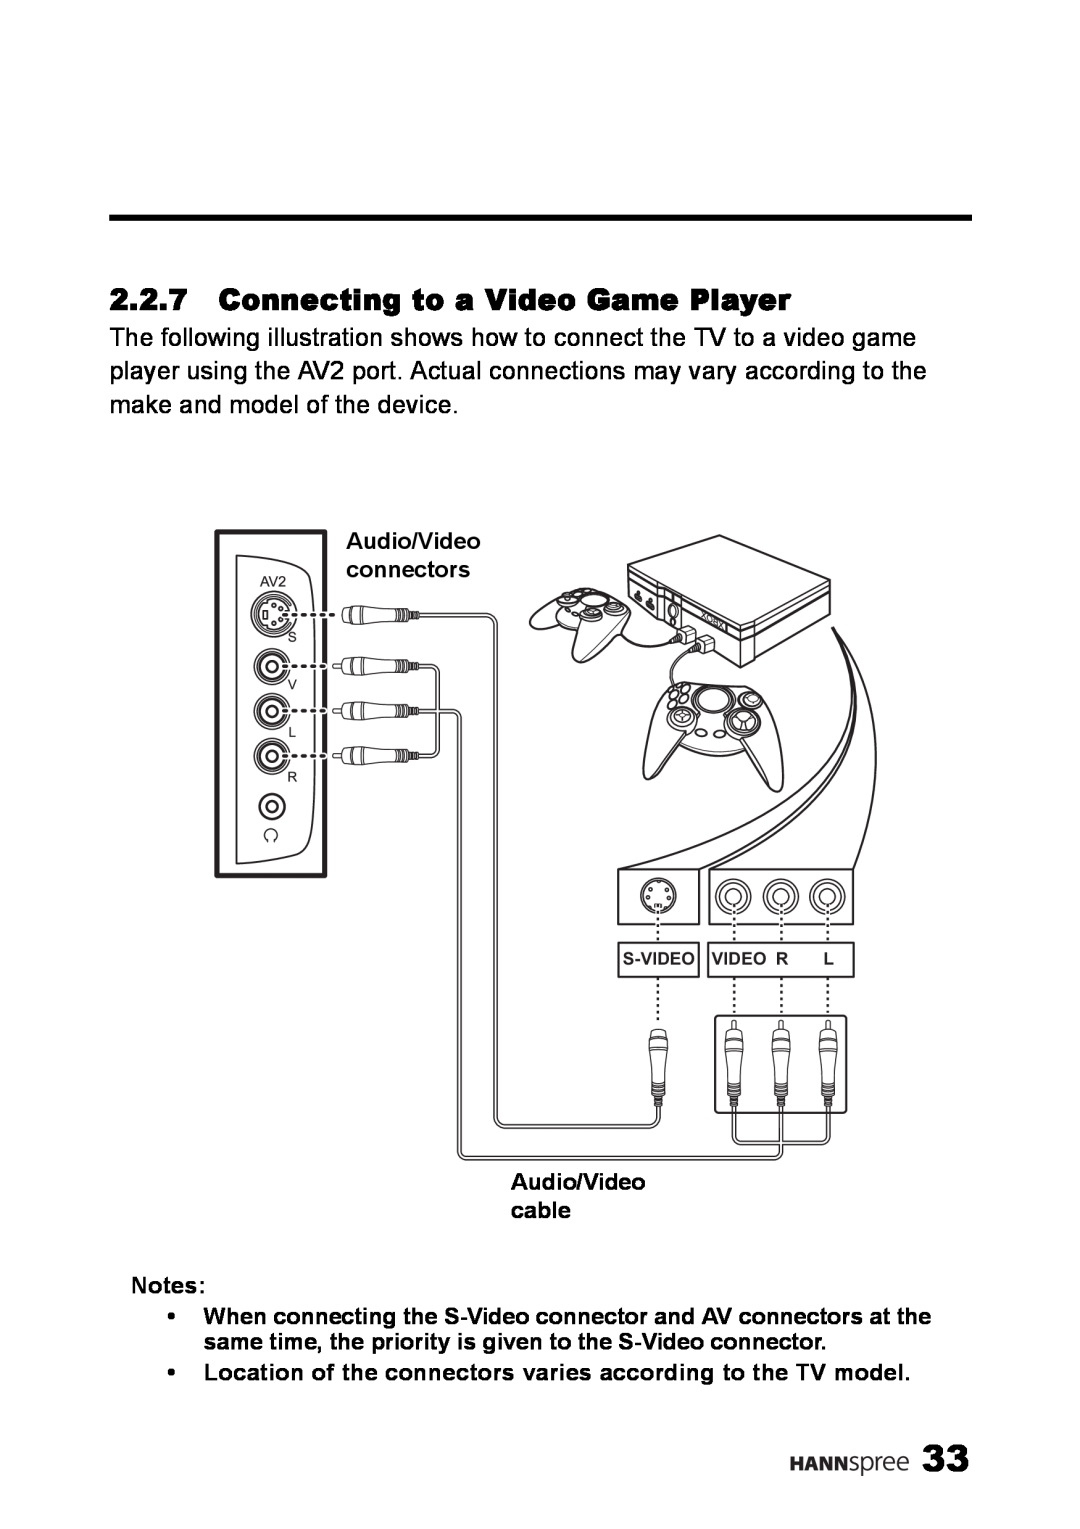 HANNspree MAK-000039 manual Connecting to a Video Game Player, S-Video Video R L 